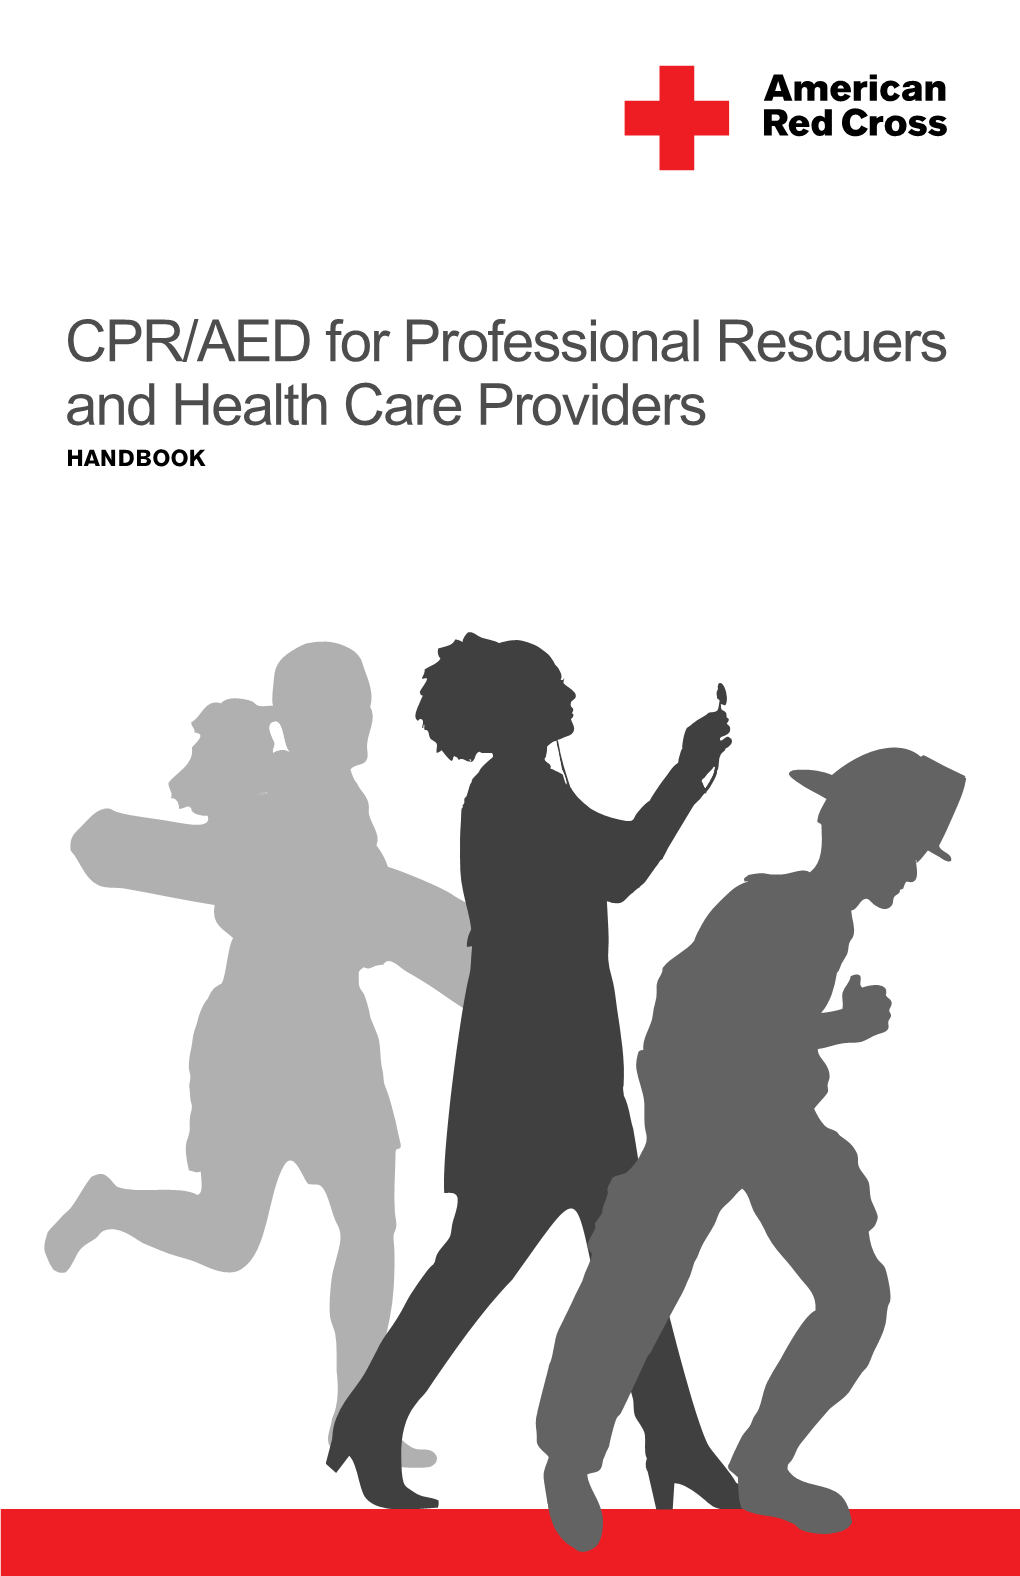 CPR/AED for Professional Rescuers and Health Care Providers HANDBOOK TABLE of CONTENTS